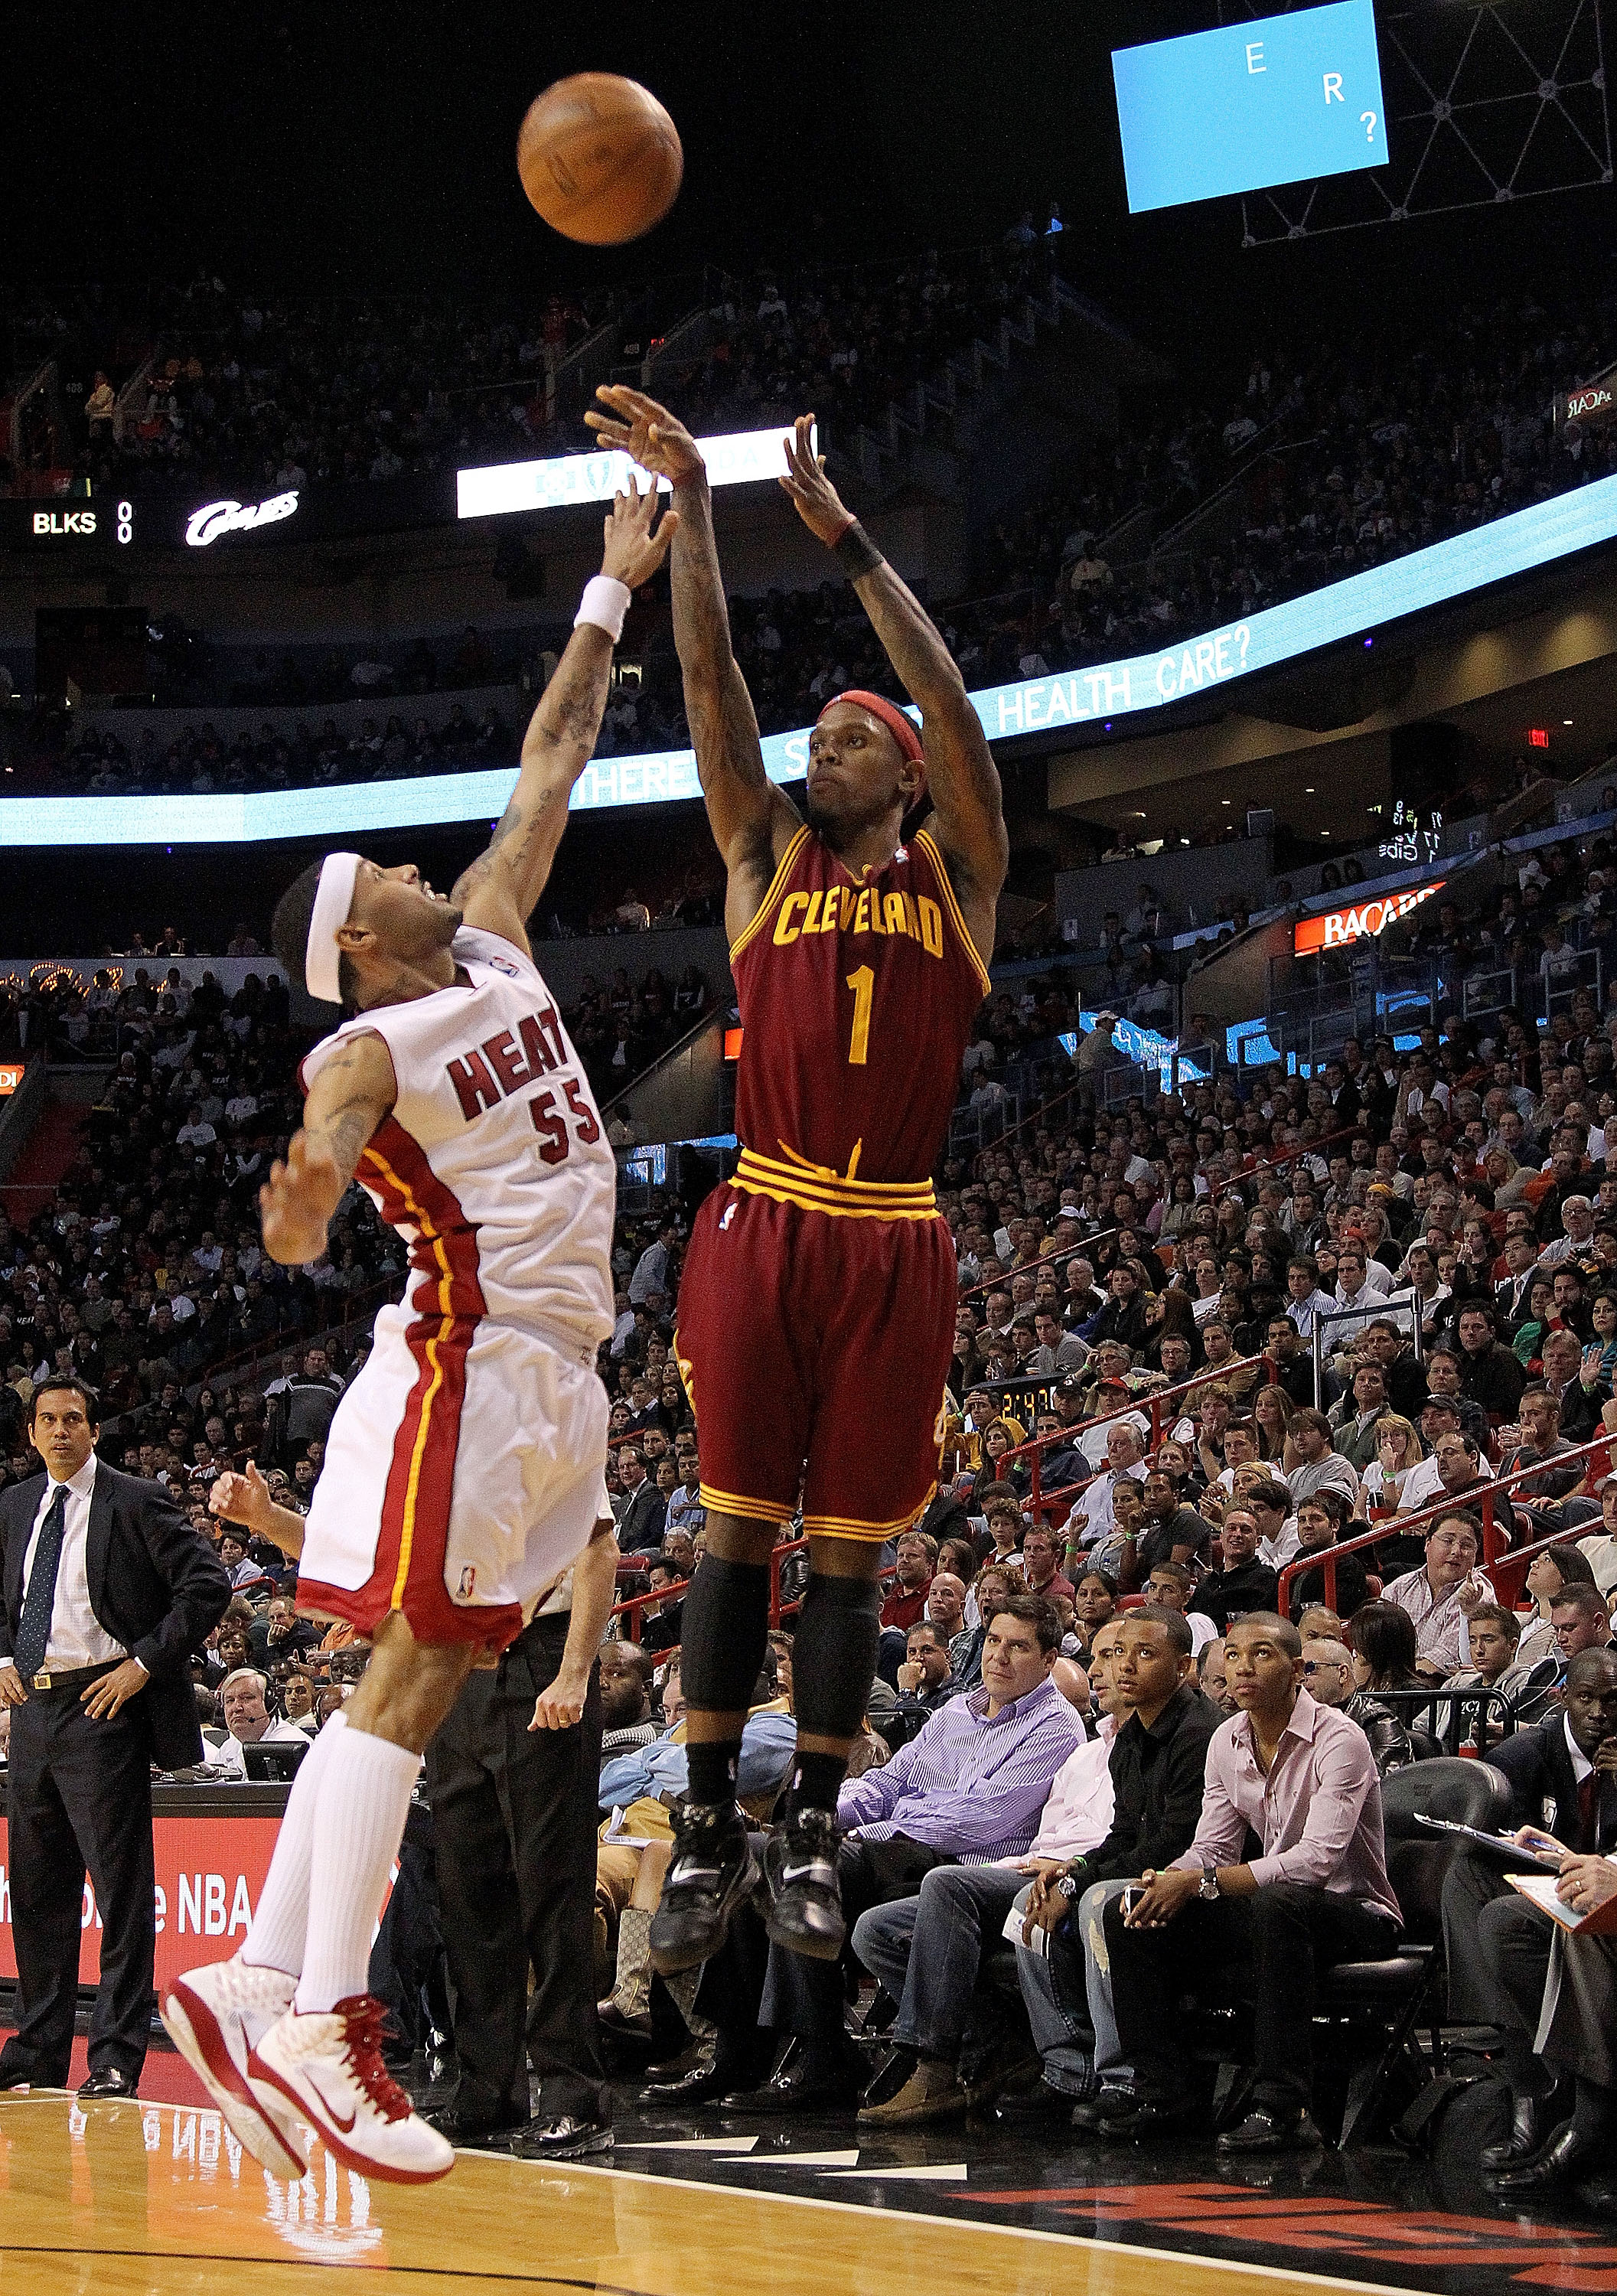 MIAMI, FL - DECEMBER 15:  Daniel Gibson #1 of the Cleveland Cavaliers shoots over Eddie House #55 of the Miami Heat  during a game at American Airlines Arena on December 15, 2010 in Miami, Florida. NOTE TO USER: User expressly acknowledges and agrees that